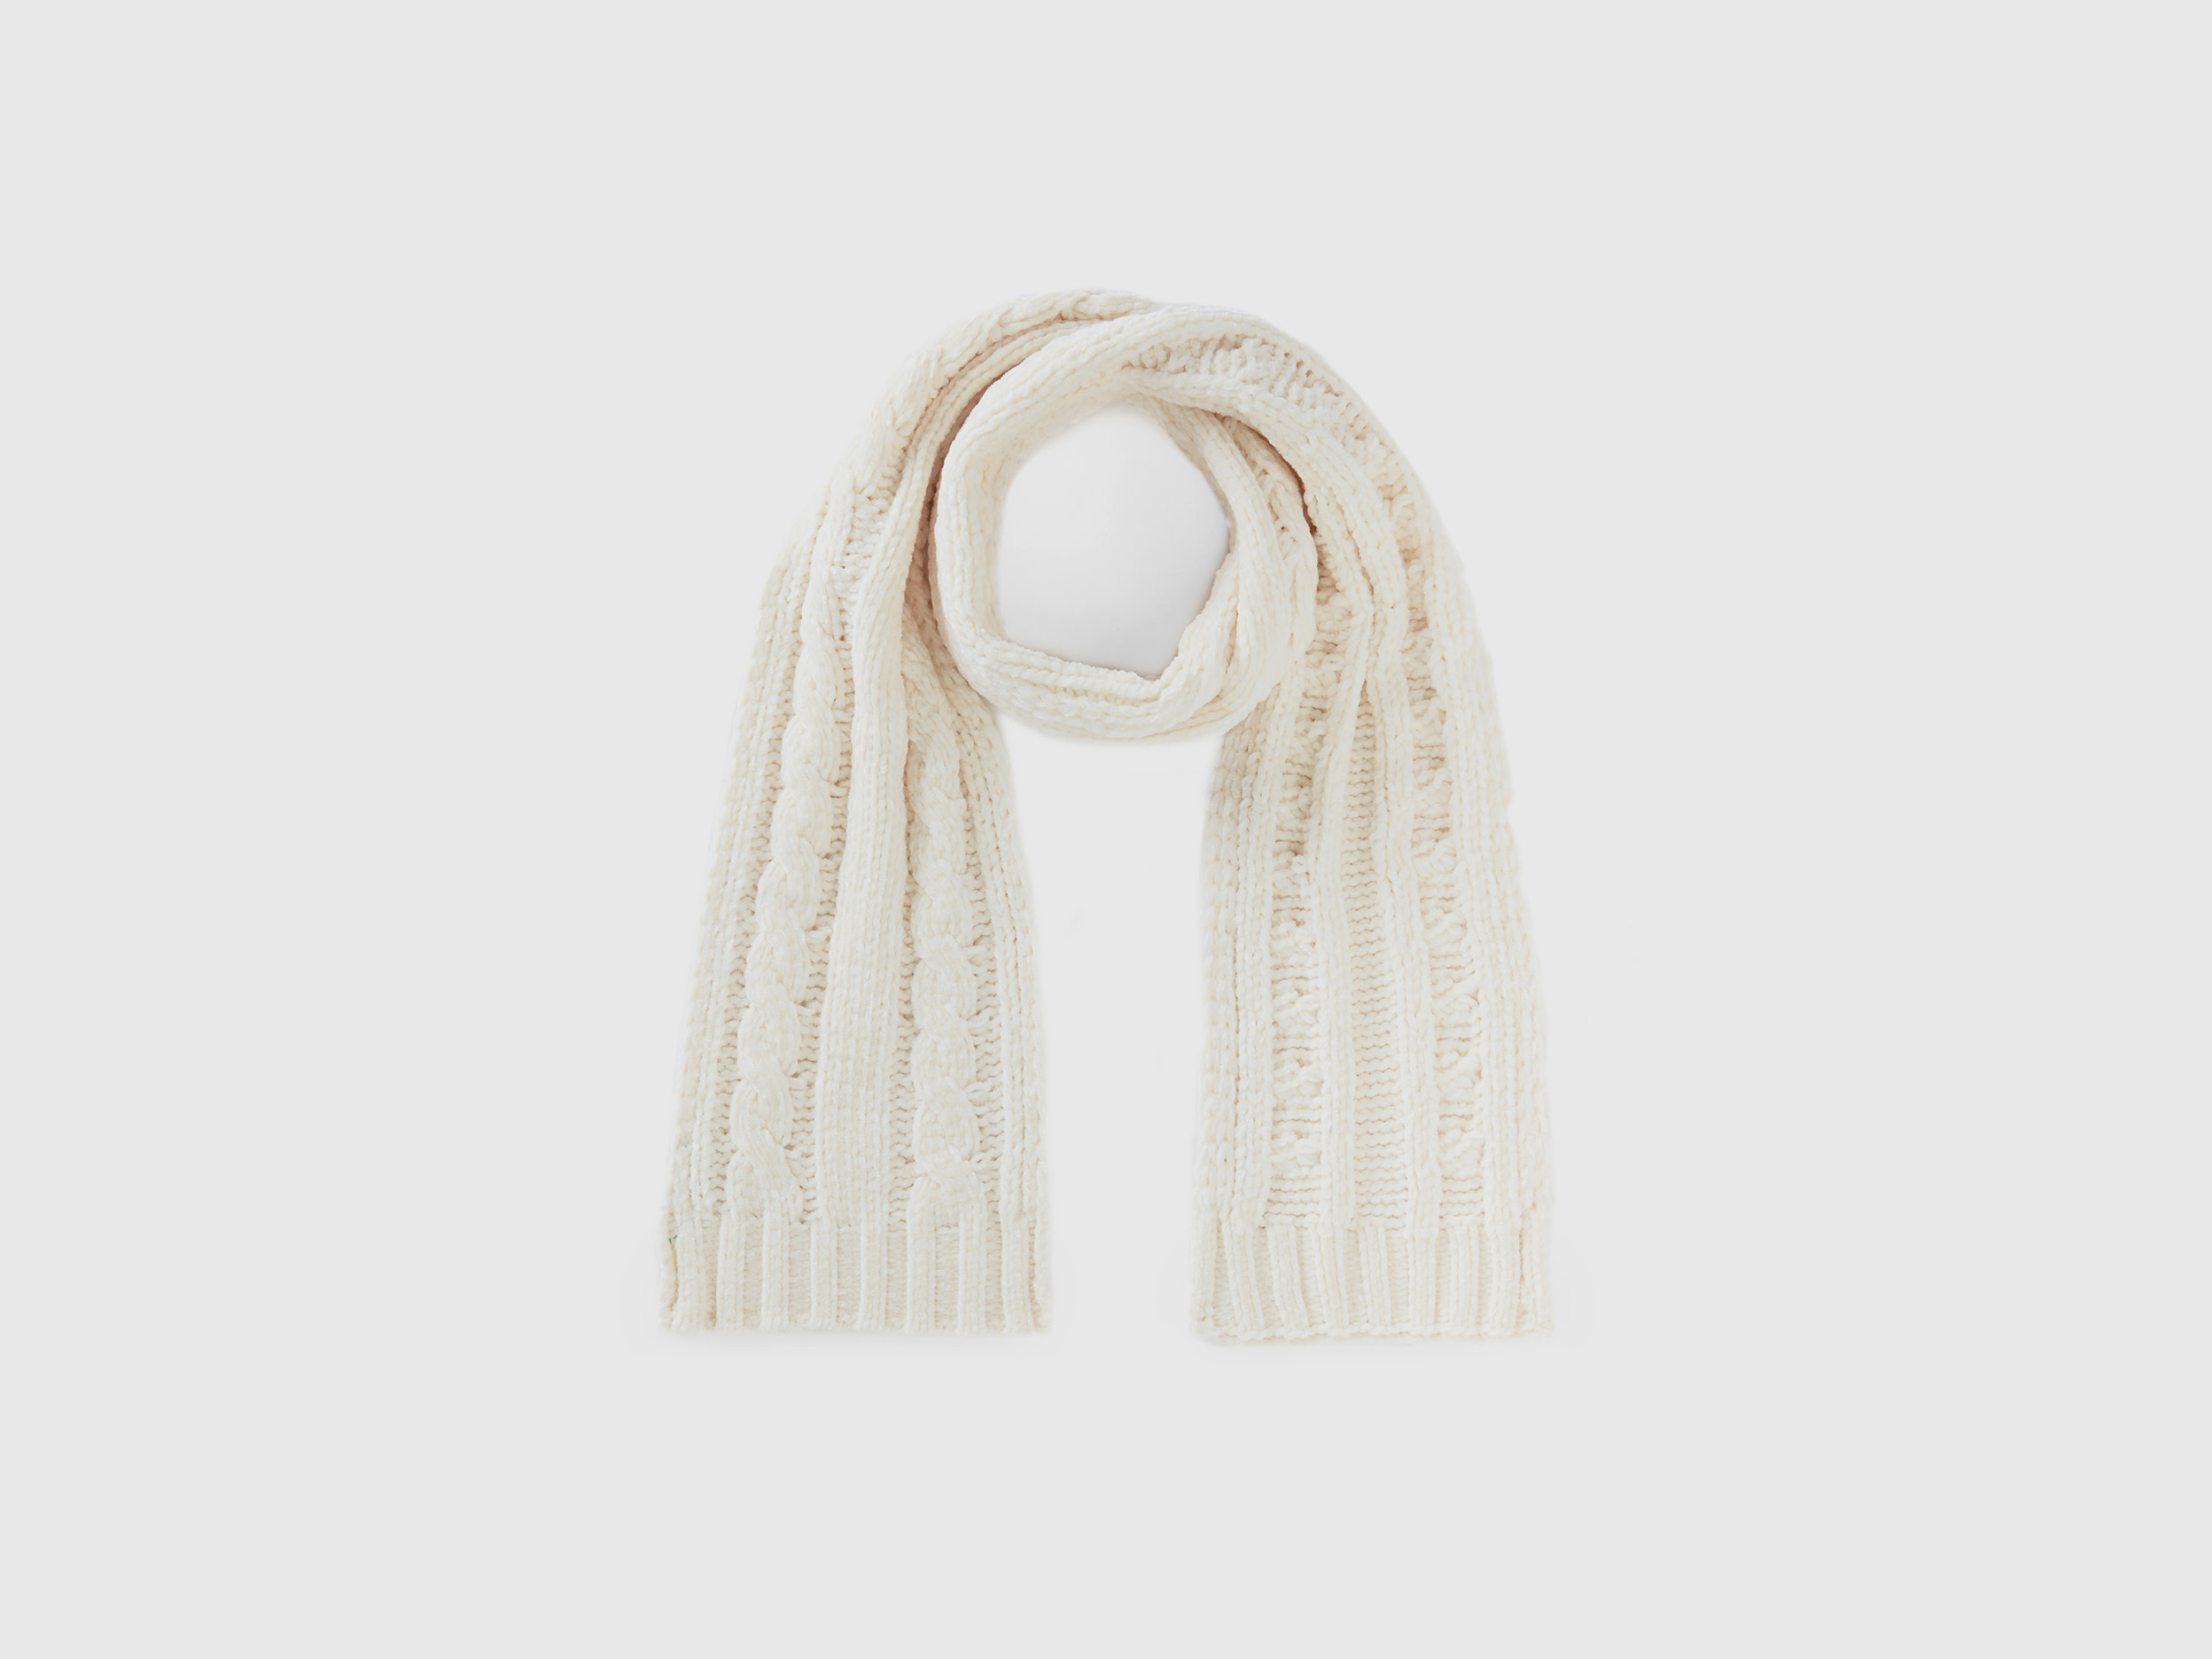 Benetton, Chenille Scarf With Cable Knit, size 4-6, White, Kids